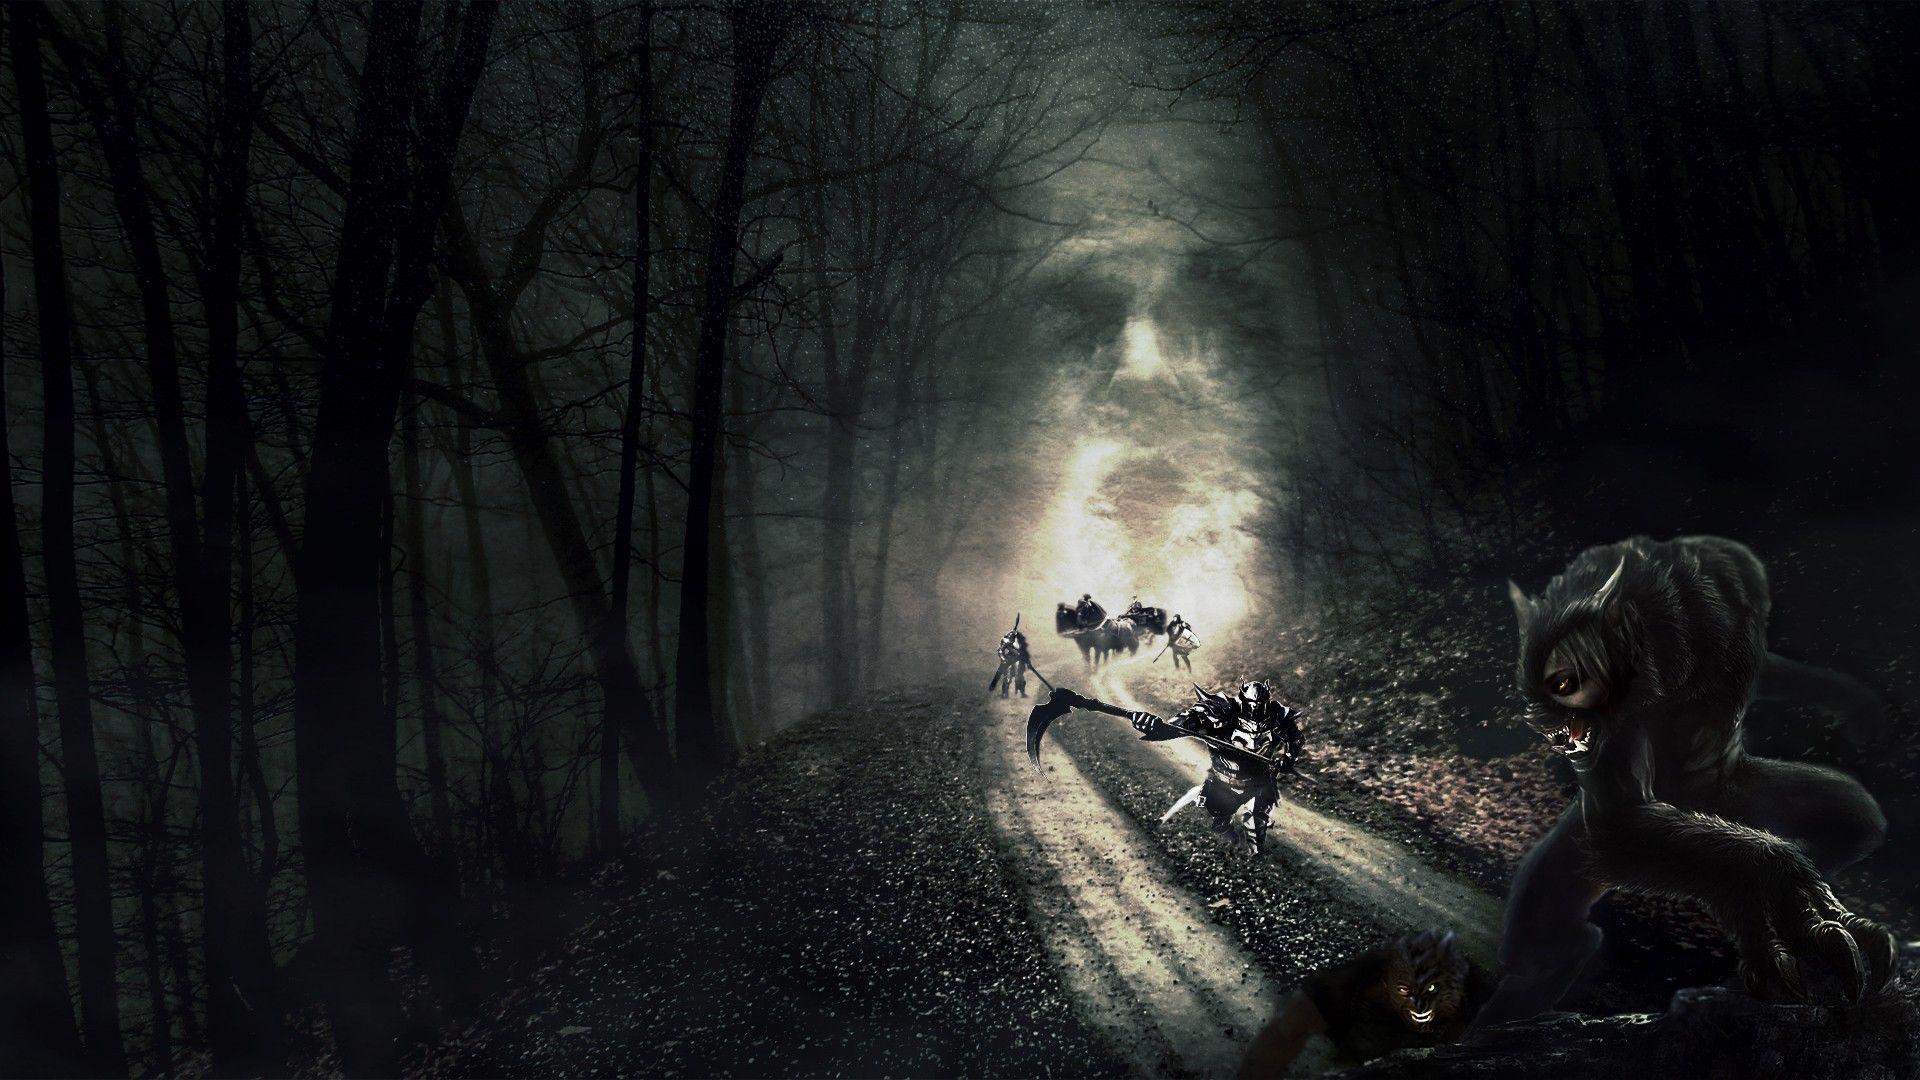 Road deaths in the dark forest wallpaper and image